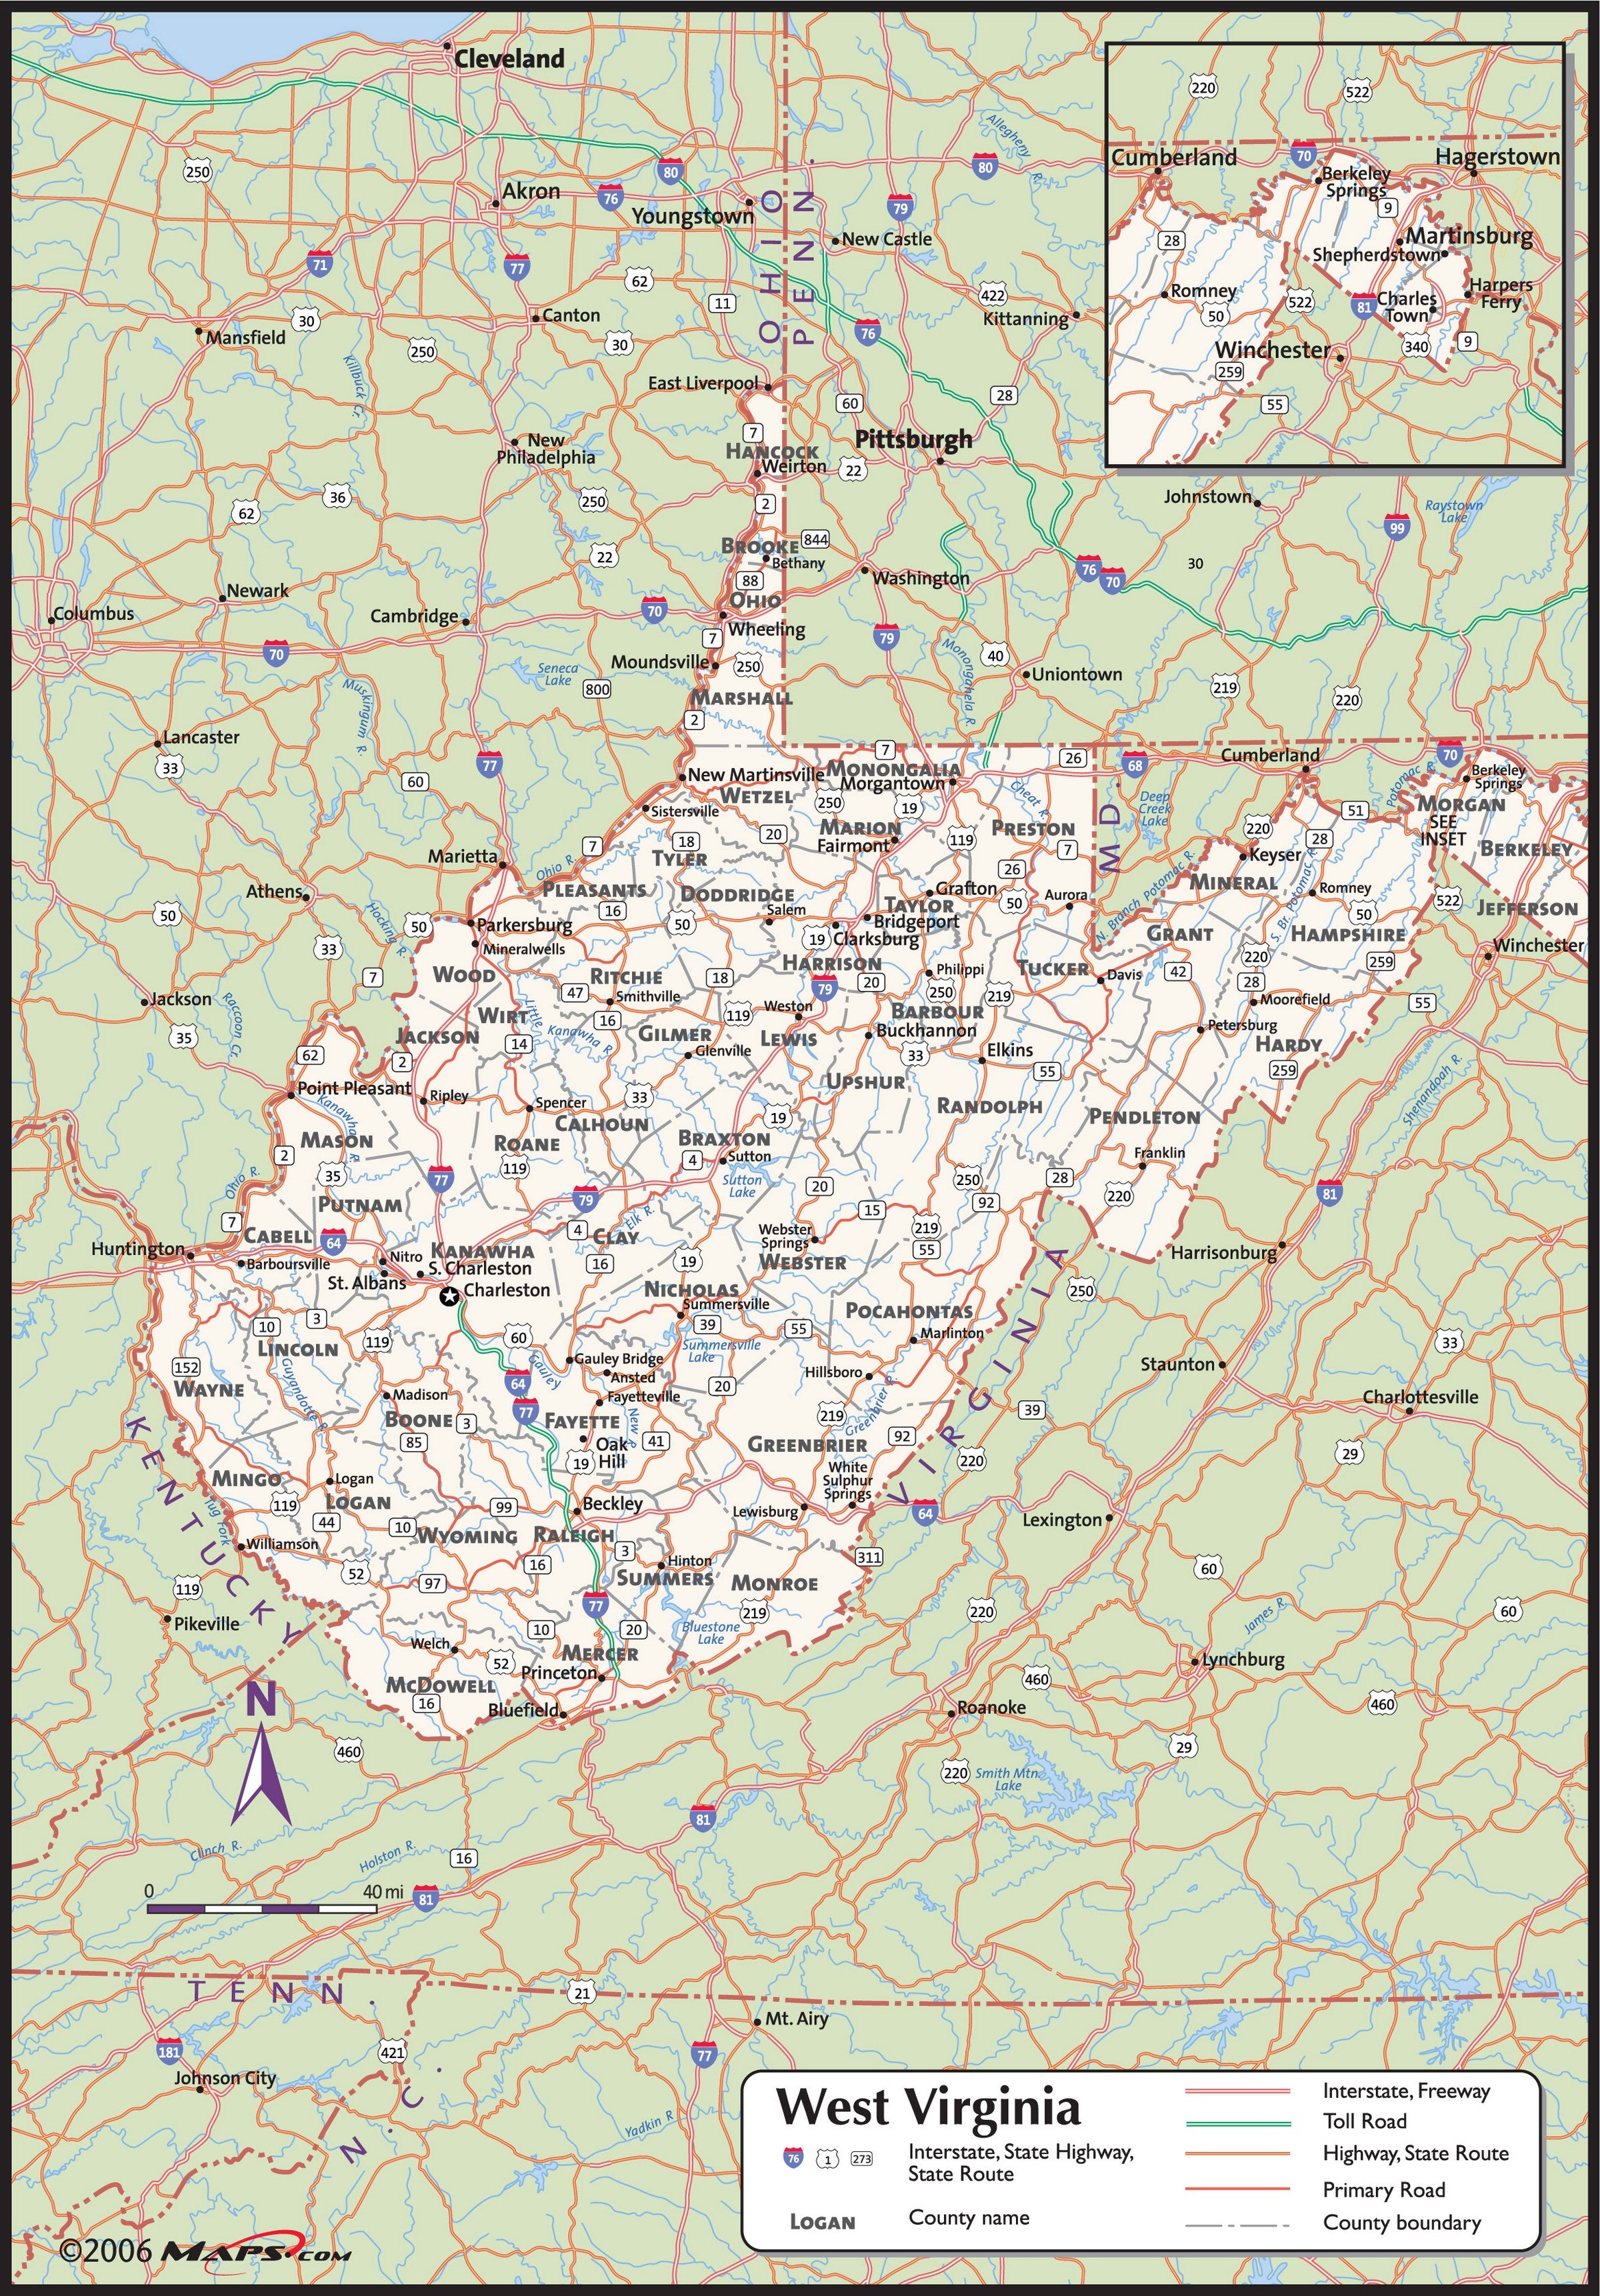 map-of-virginia-and-west-virginia-counties